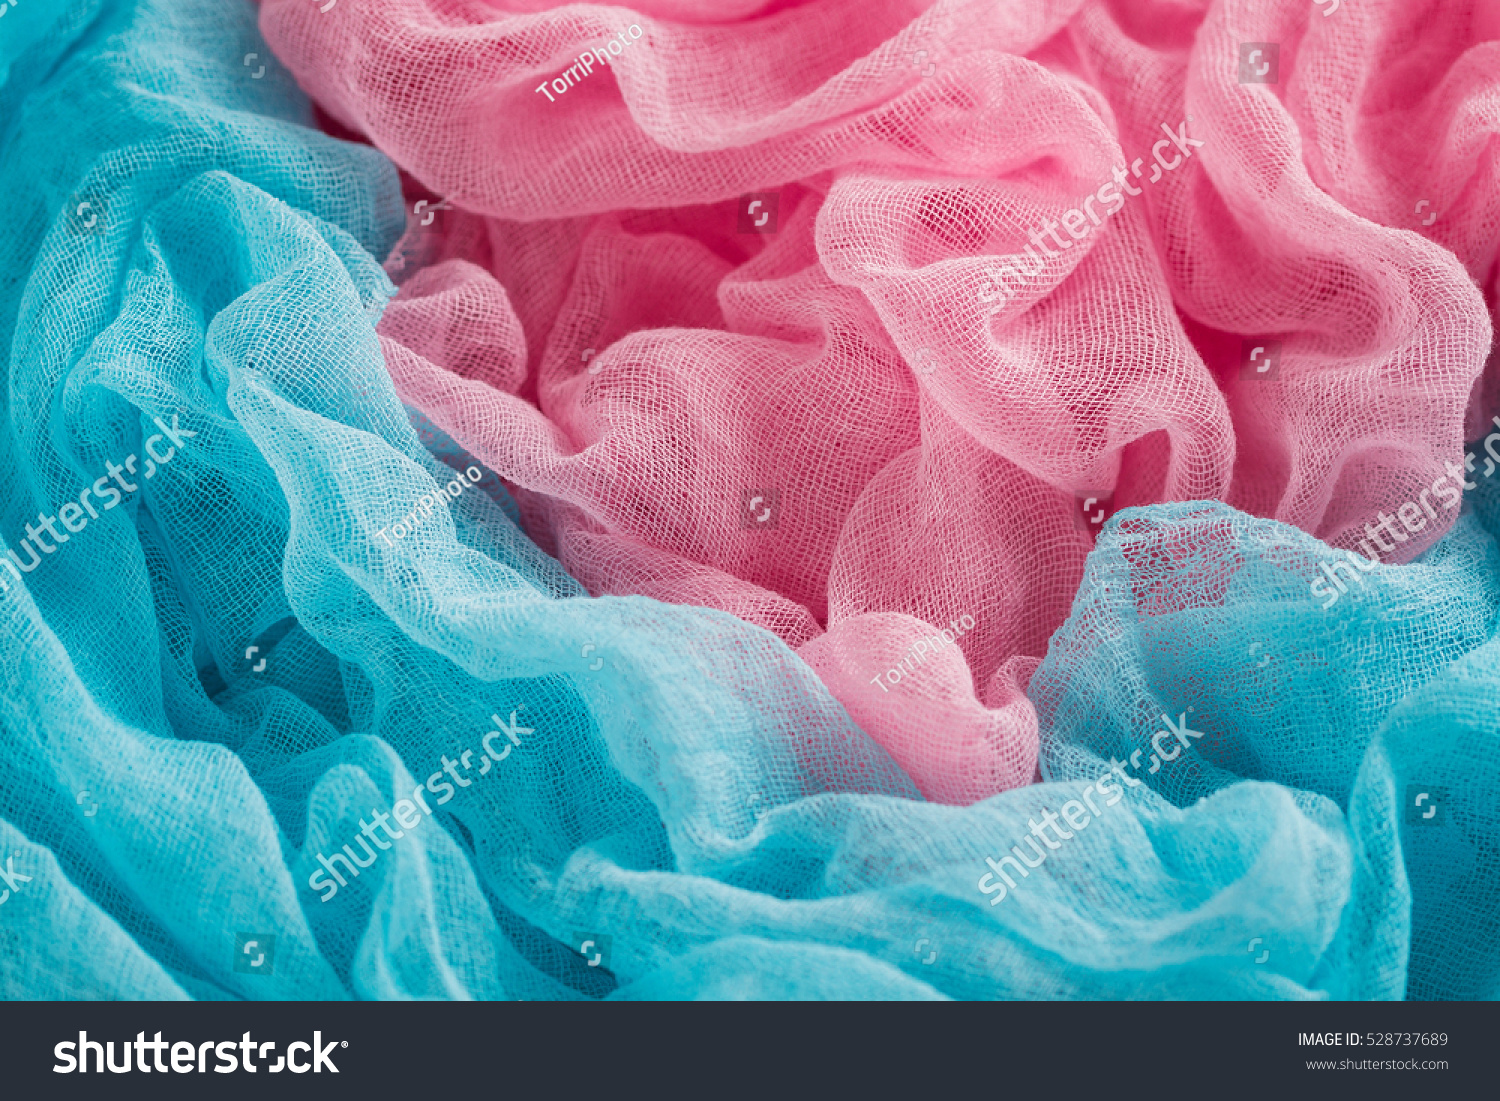 https://www.shutterstock.com/pic-528737689/stock-photo-hand-dyed-blue-and-pink-gauze-fabric-colorful-cloth-texture-background.html